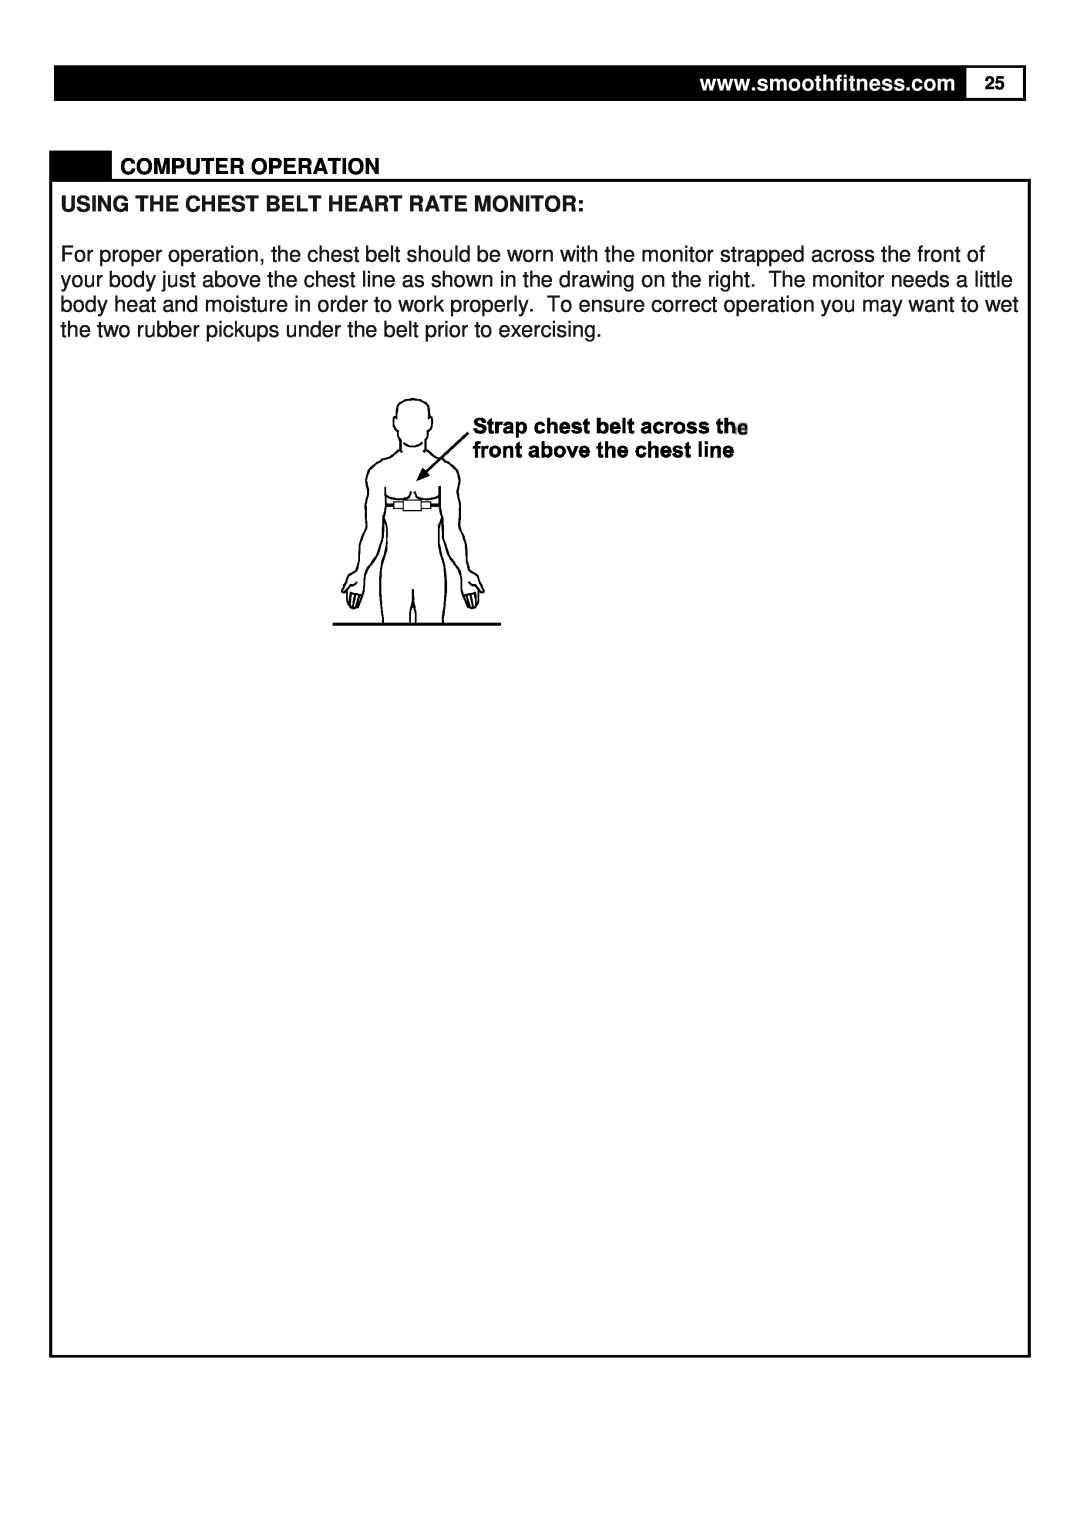 Smooth Fitness CE-3.0 user manual Using The Chest Belt Heart Rate Monitor, Computer Operation 